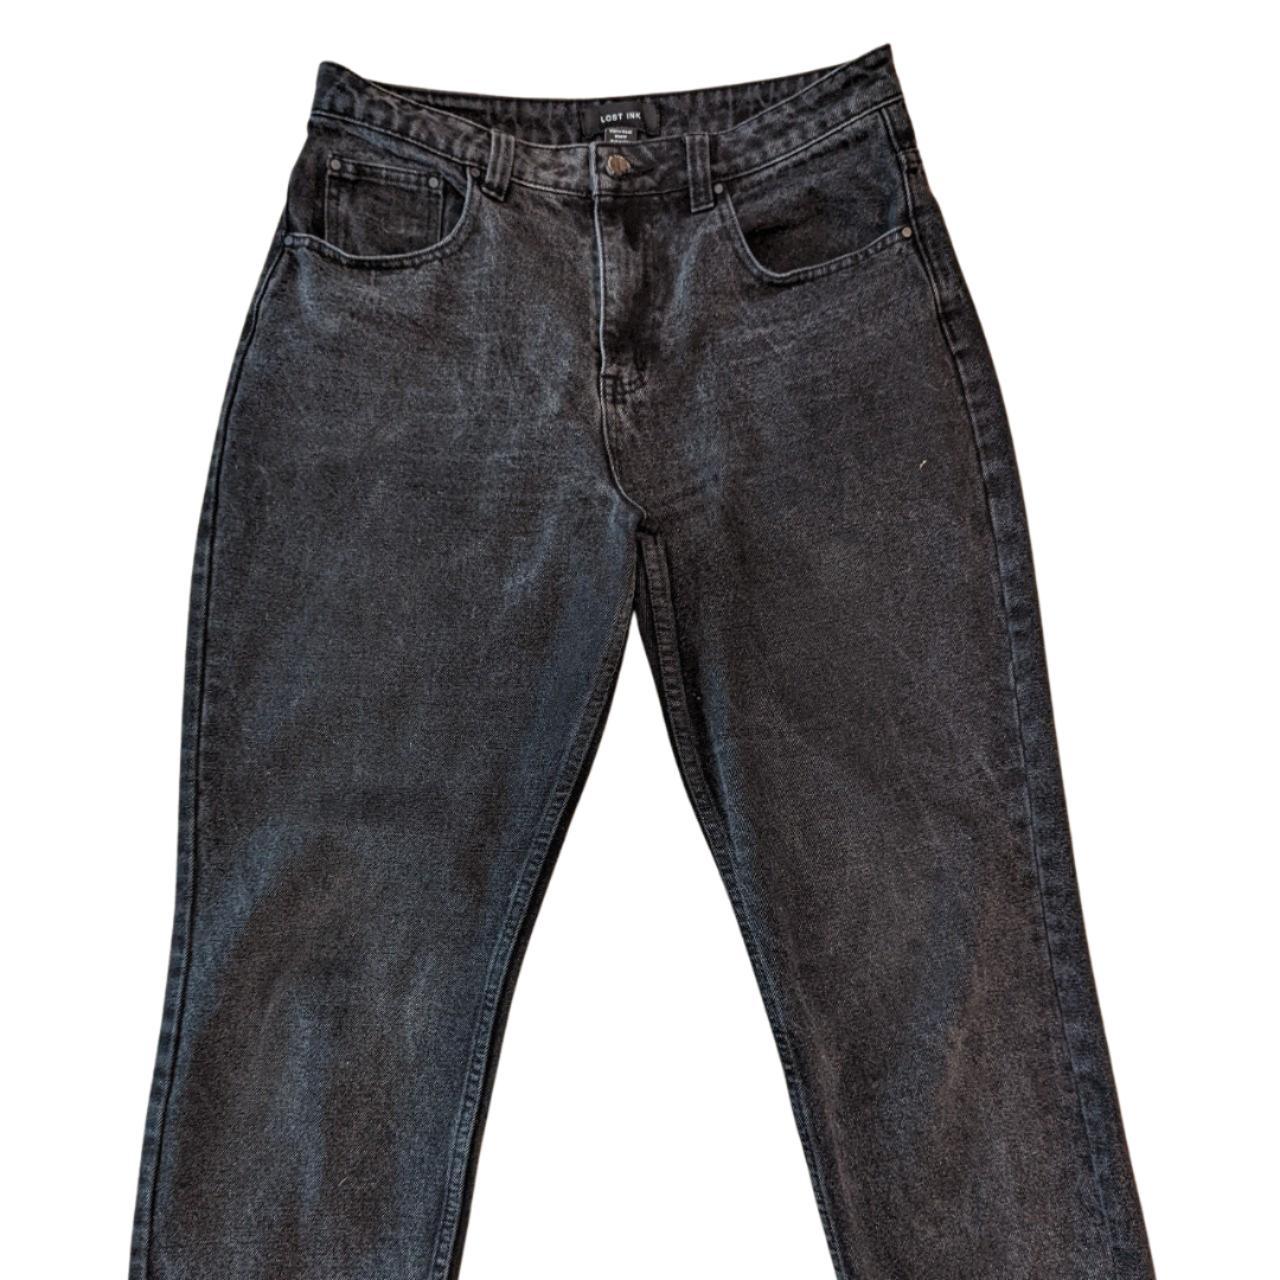 Product Image 3 - LOST INK
- hi-rise mom jeans